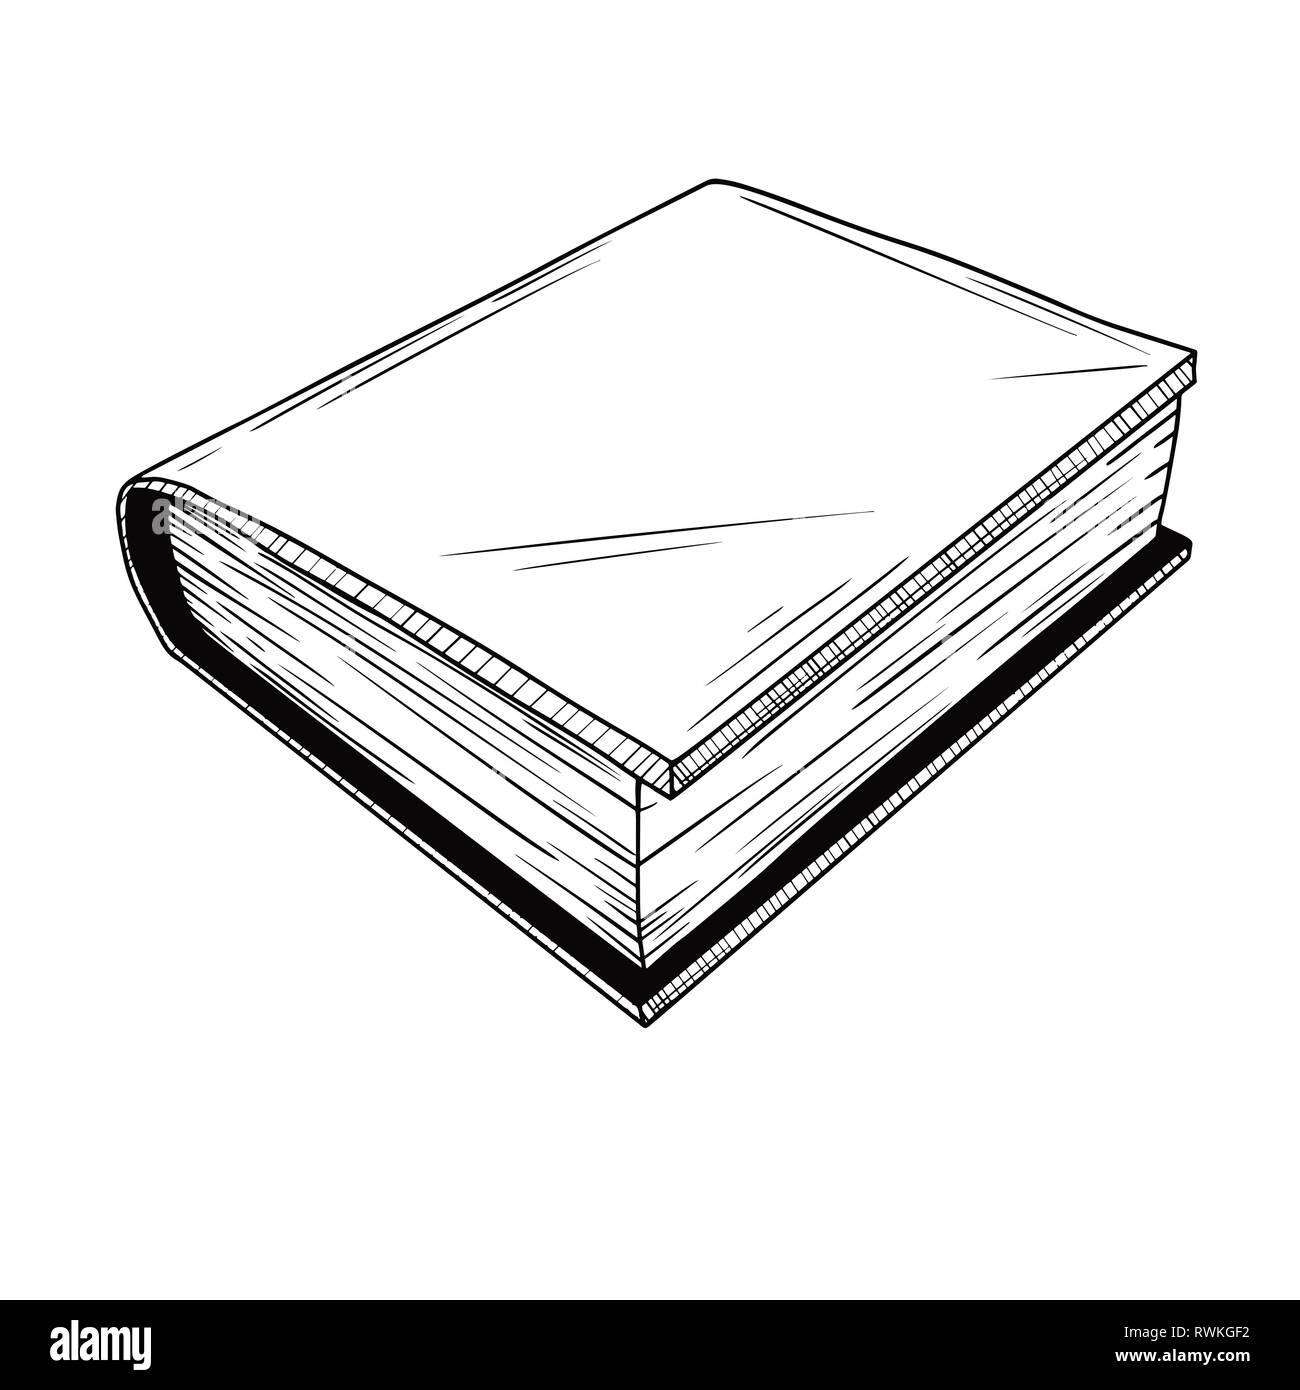 htconline.in| Oxford Sketch Book 125 gsm A3 (50Sheets)| Sketch Book|  htconline.in